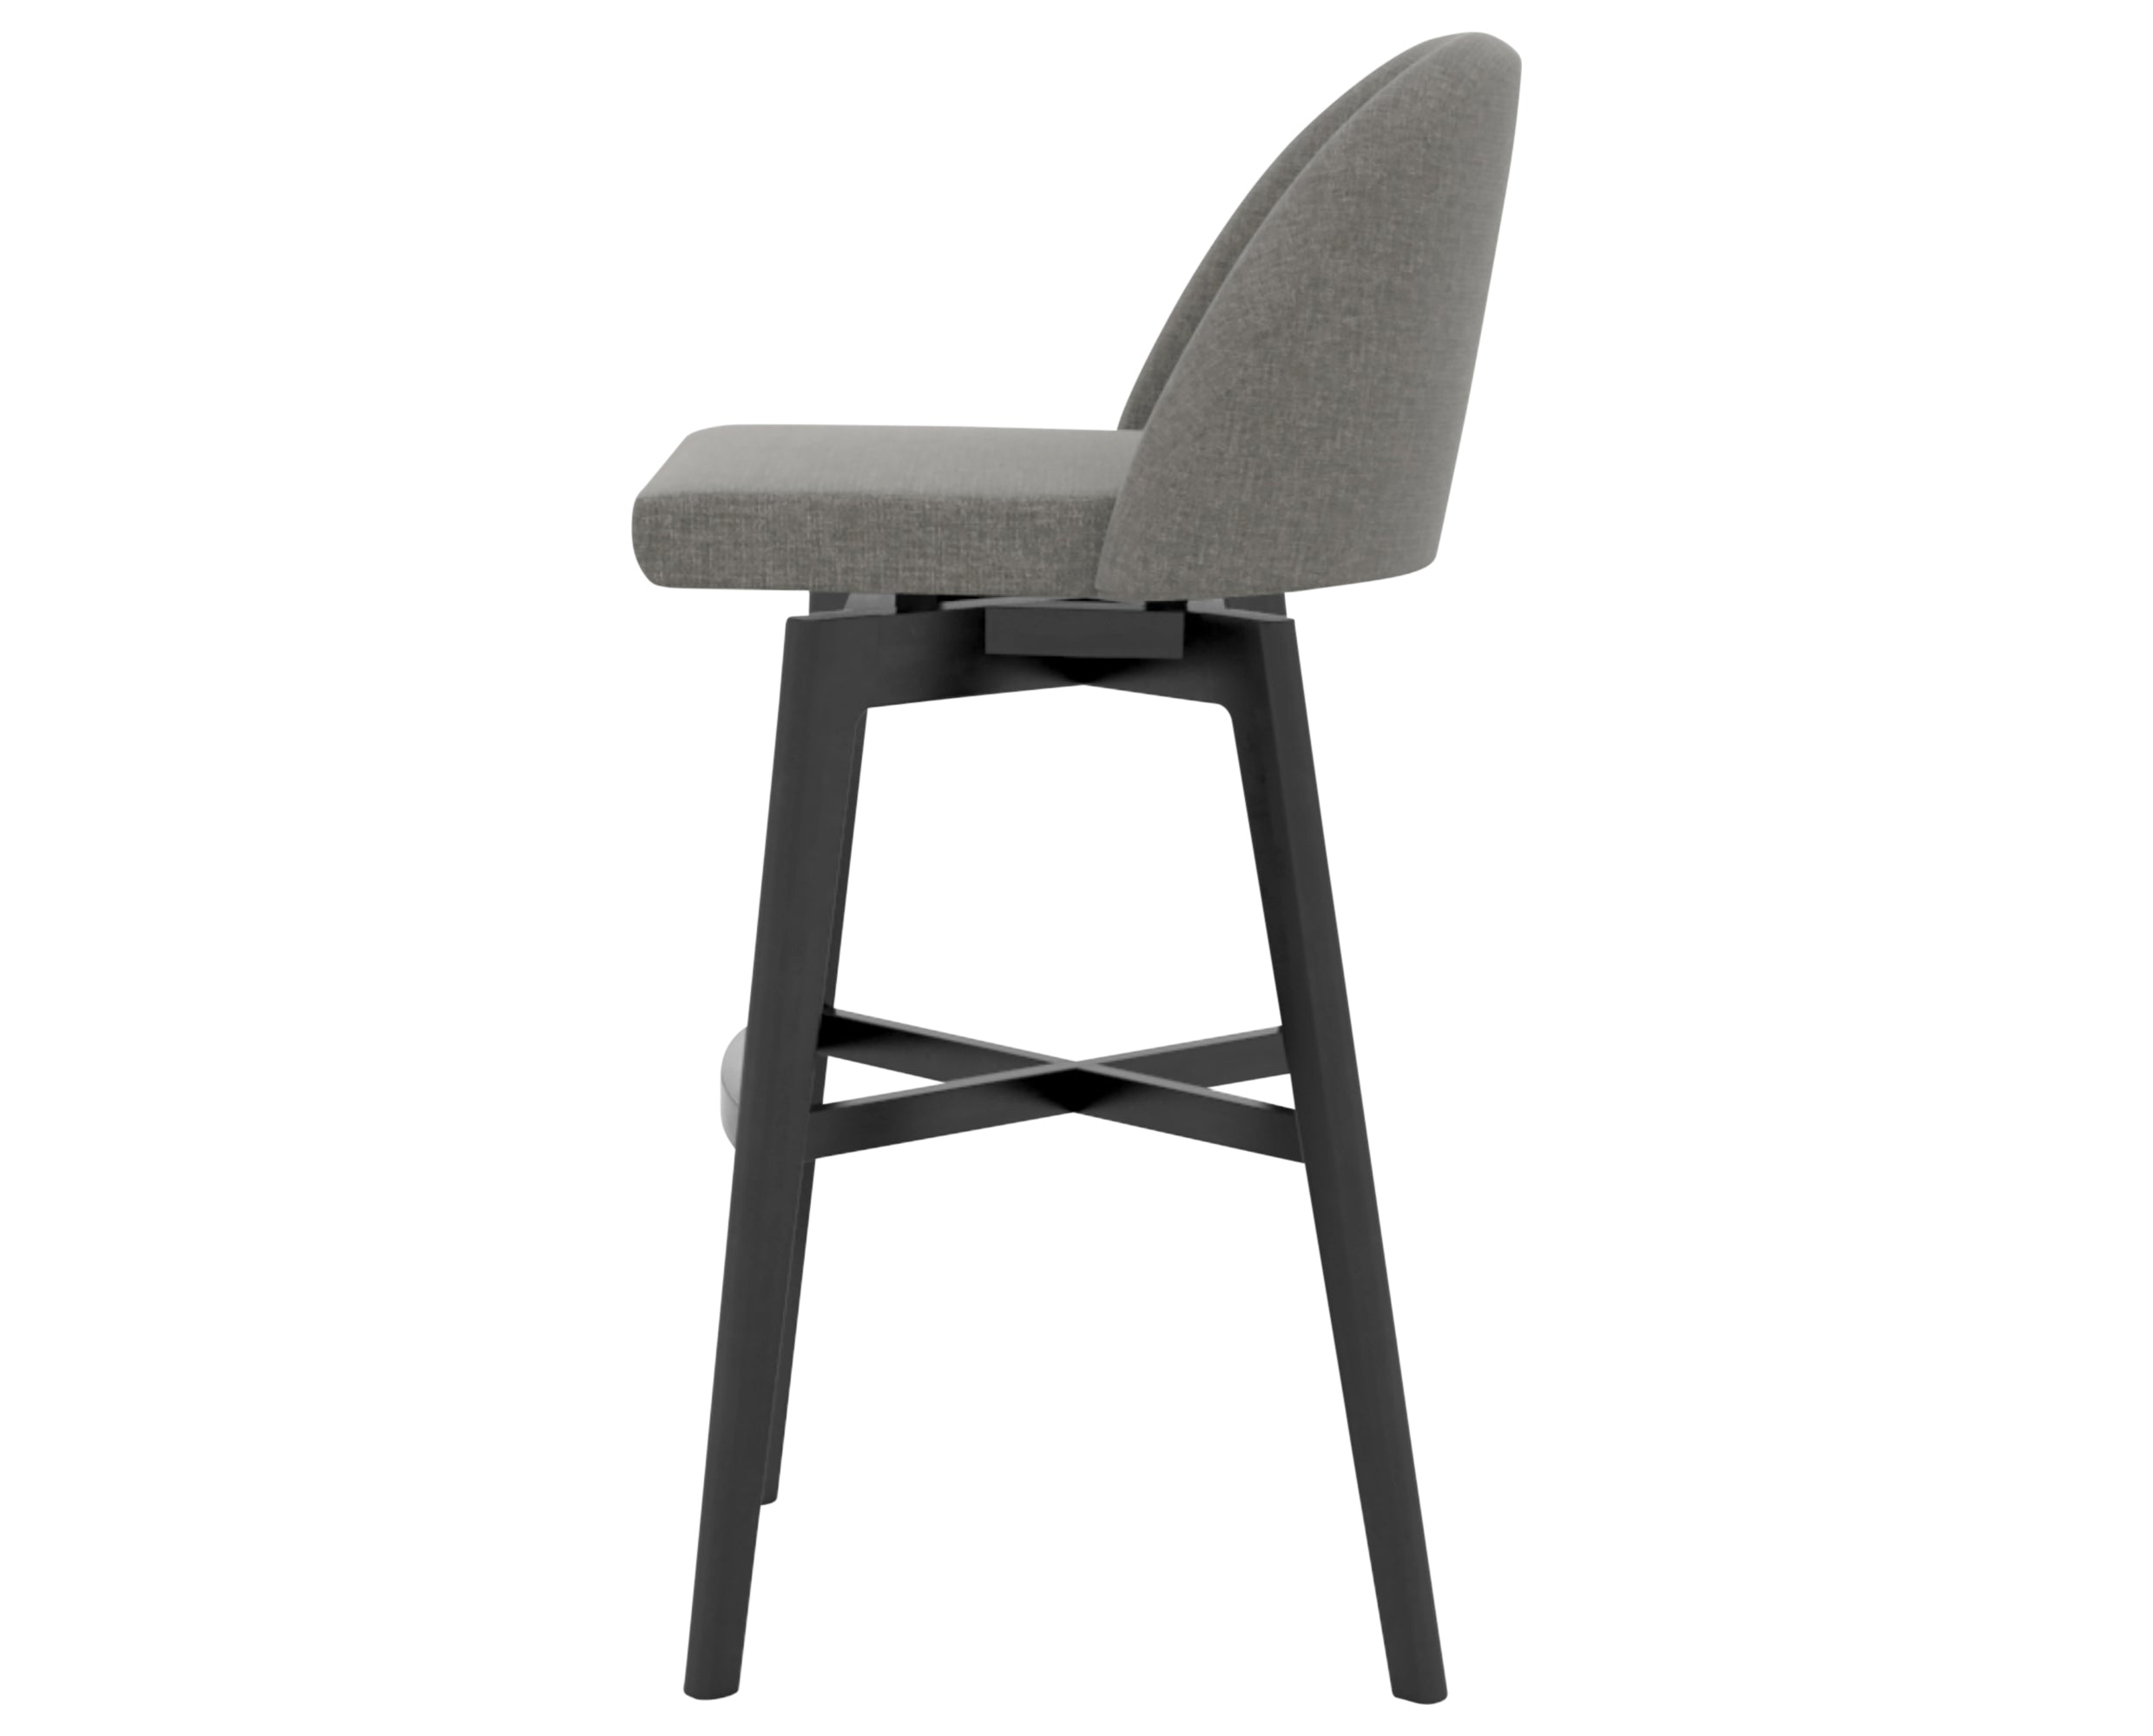 Bar Height | Canadel Downtown Counter Stool 8140 | Valley Ridge Furniture